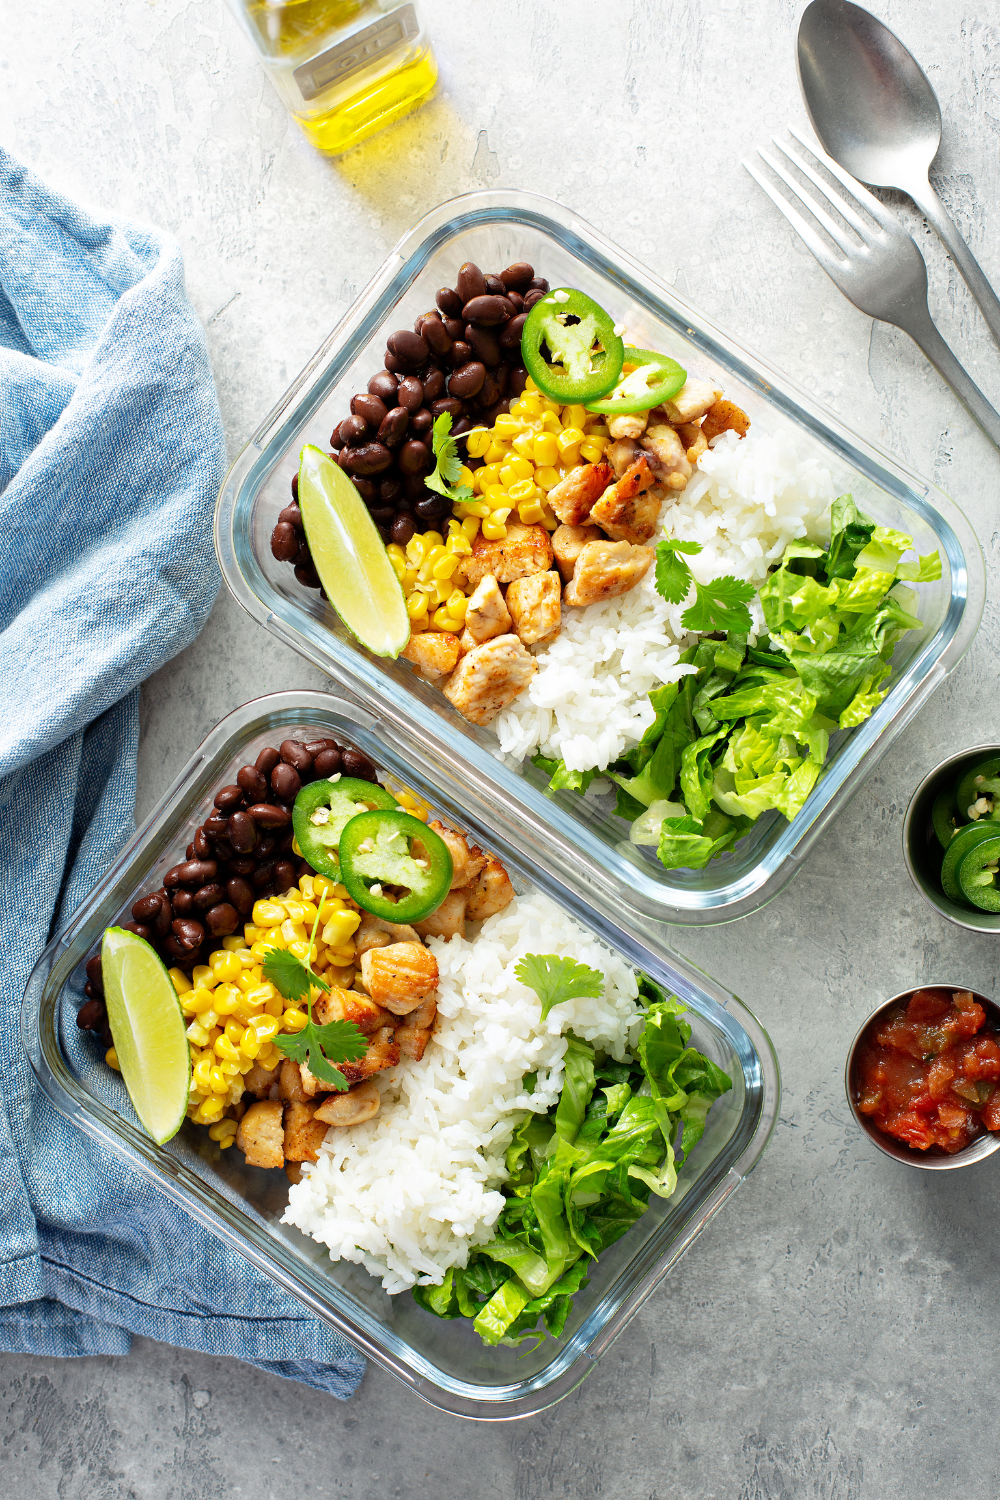 The 10 Best Tricks To Make Weekly Meal Prep a Breeze